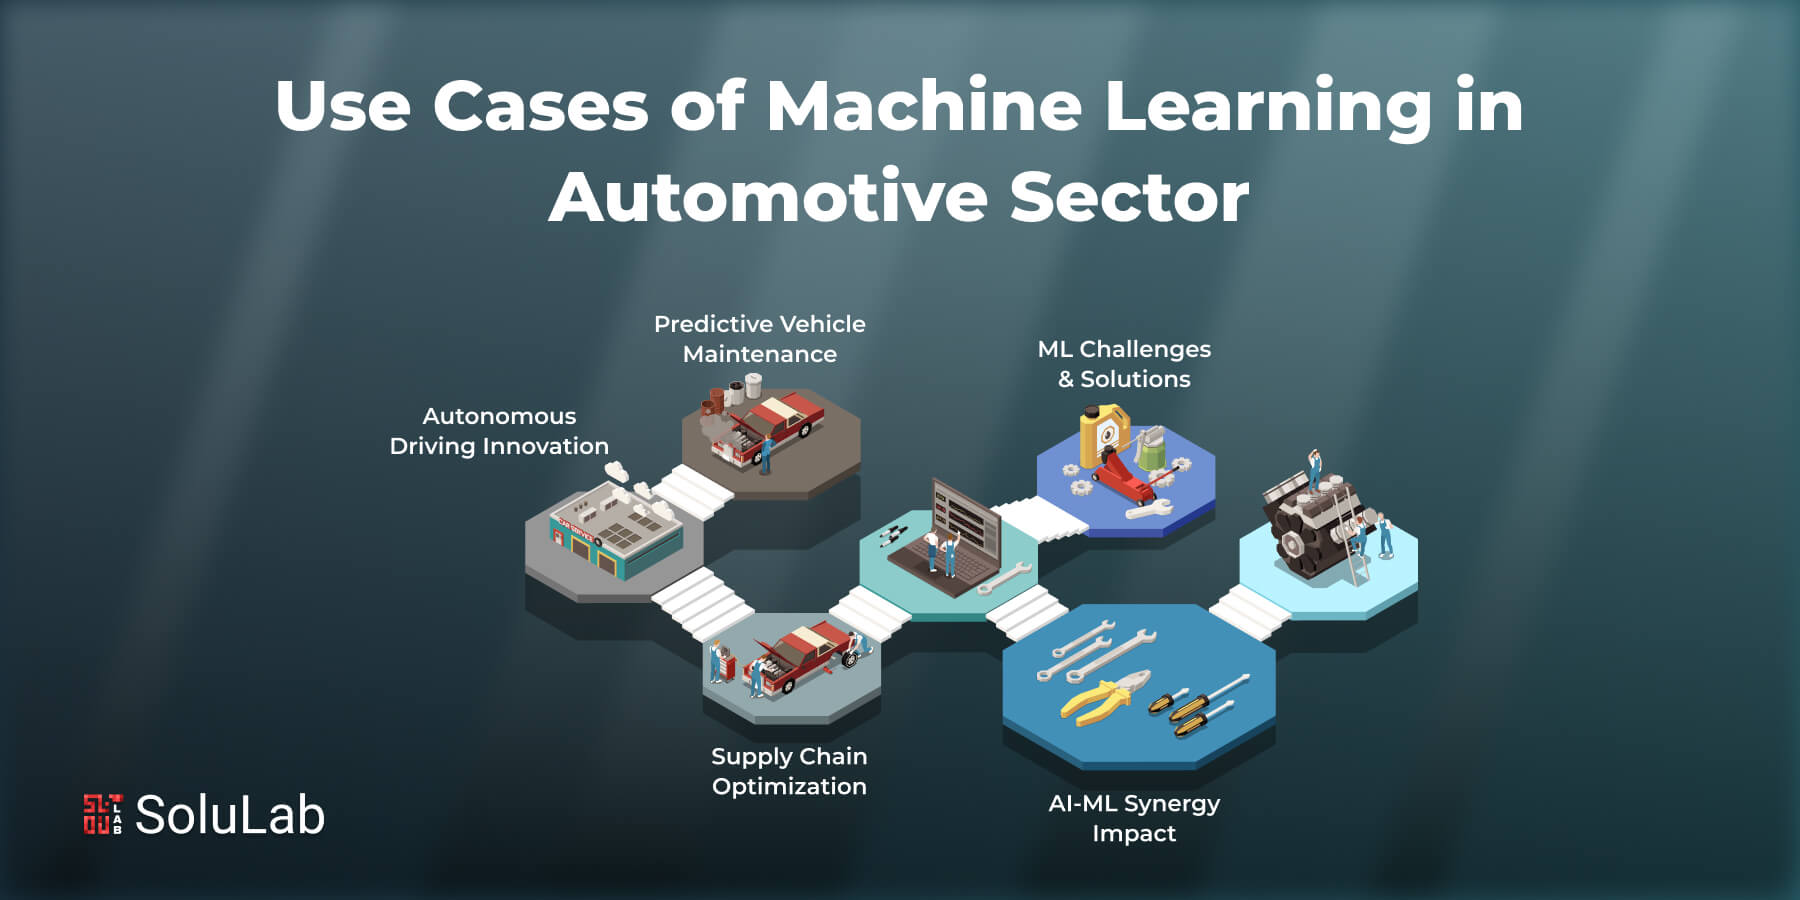 Use Cases of Machine Learning in Automotive Sector